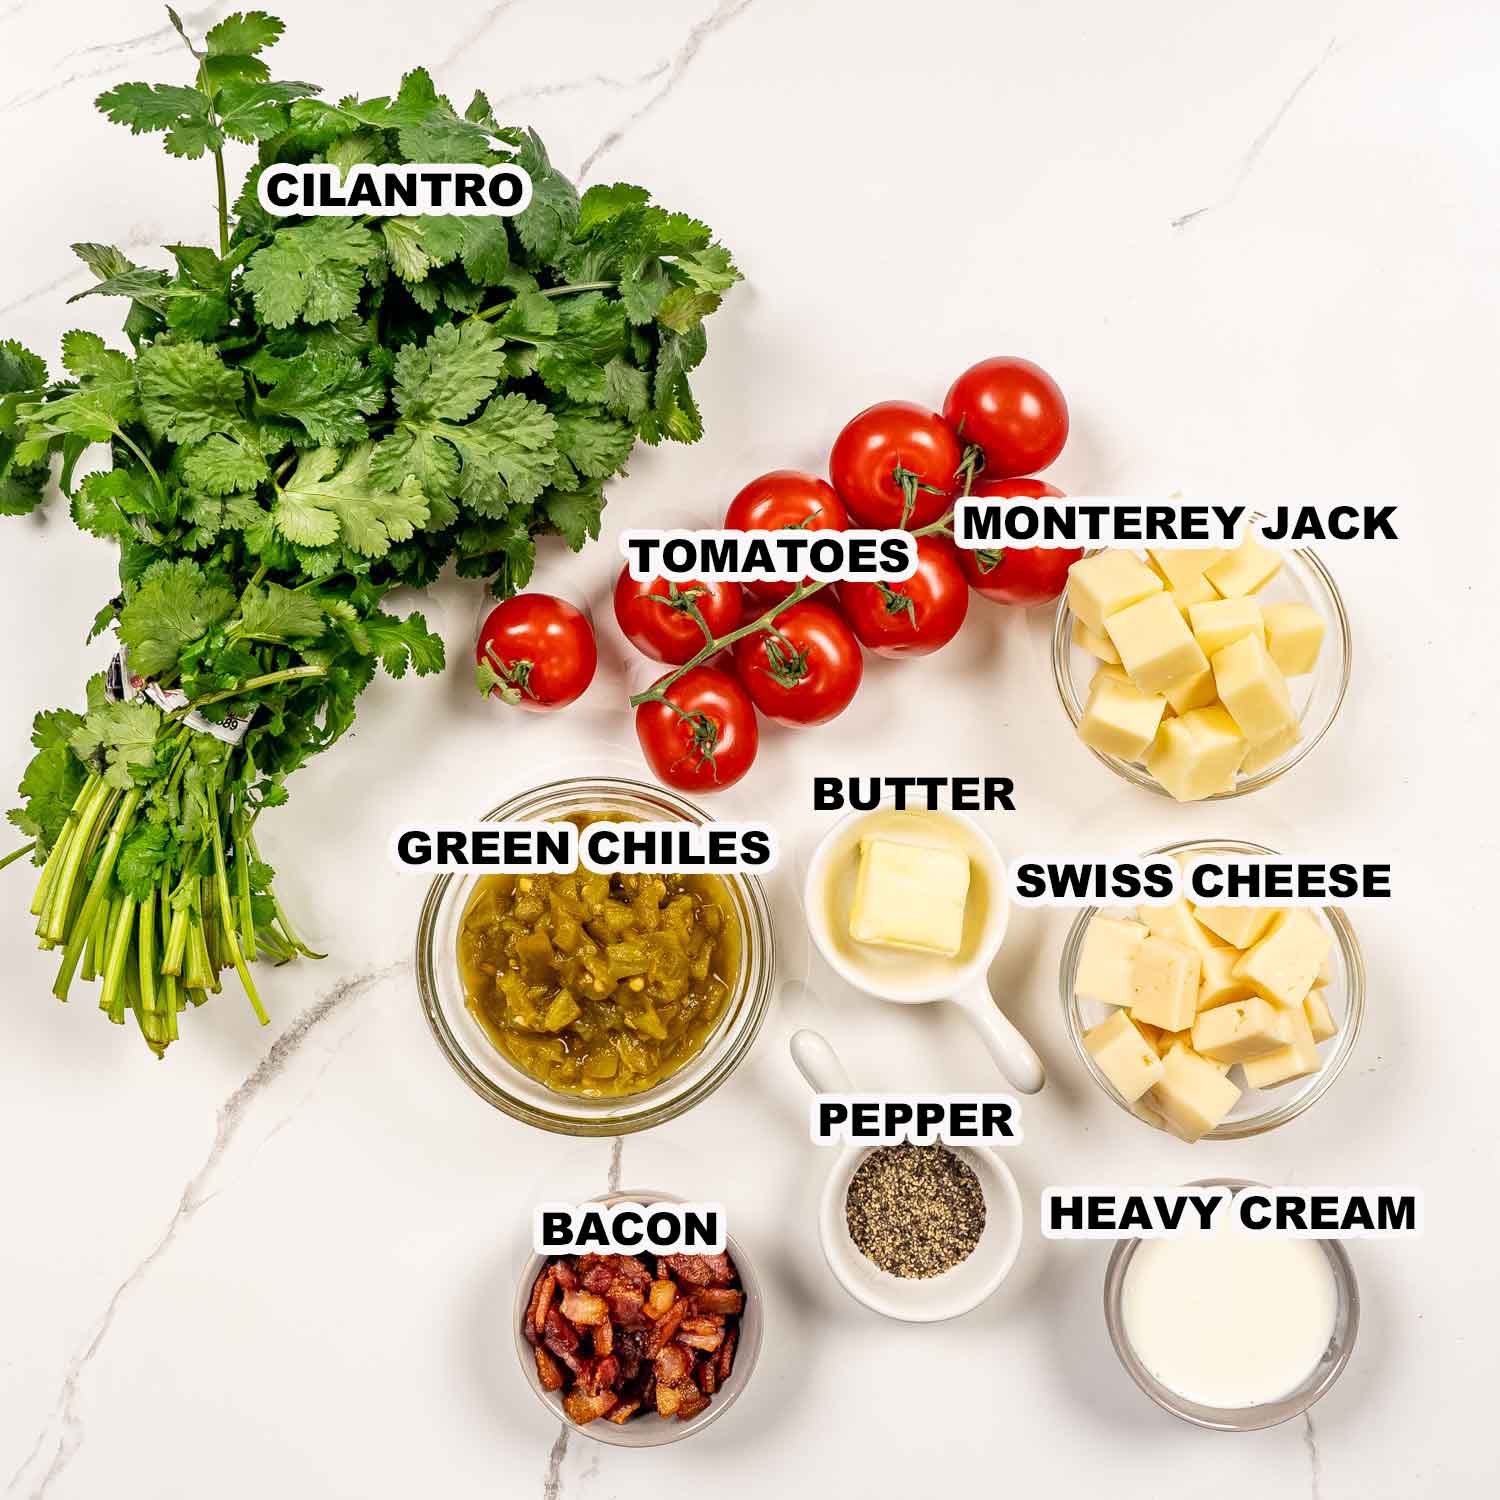 ingredients needed to make crockpot queso blanco.